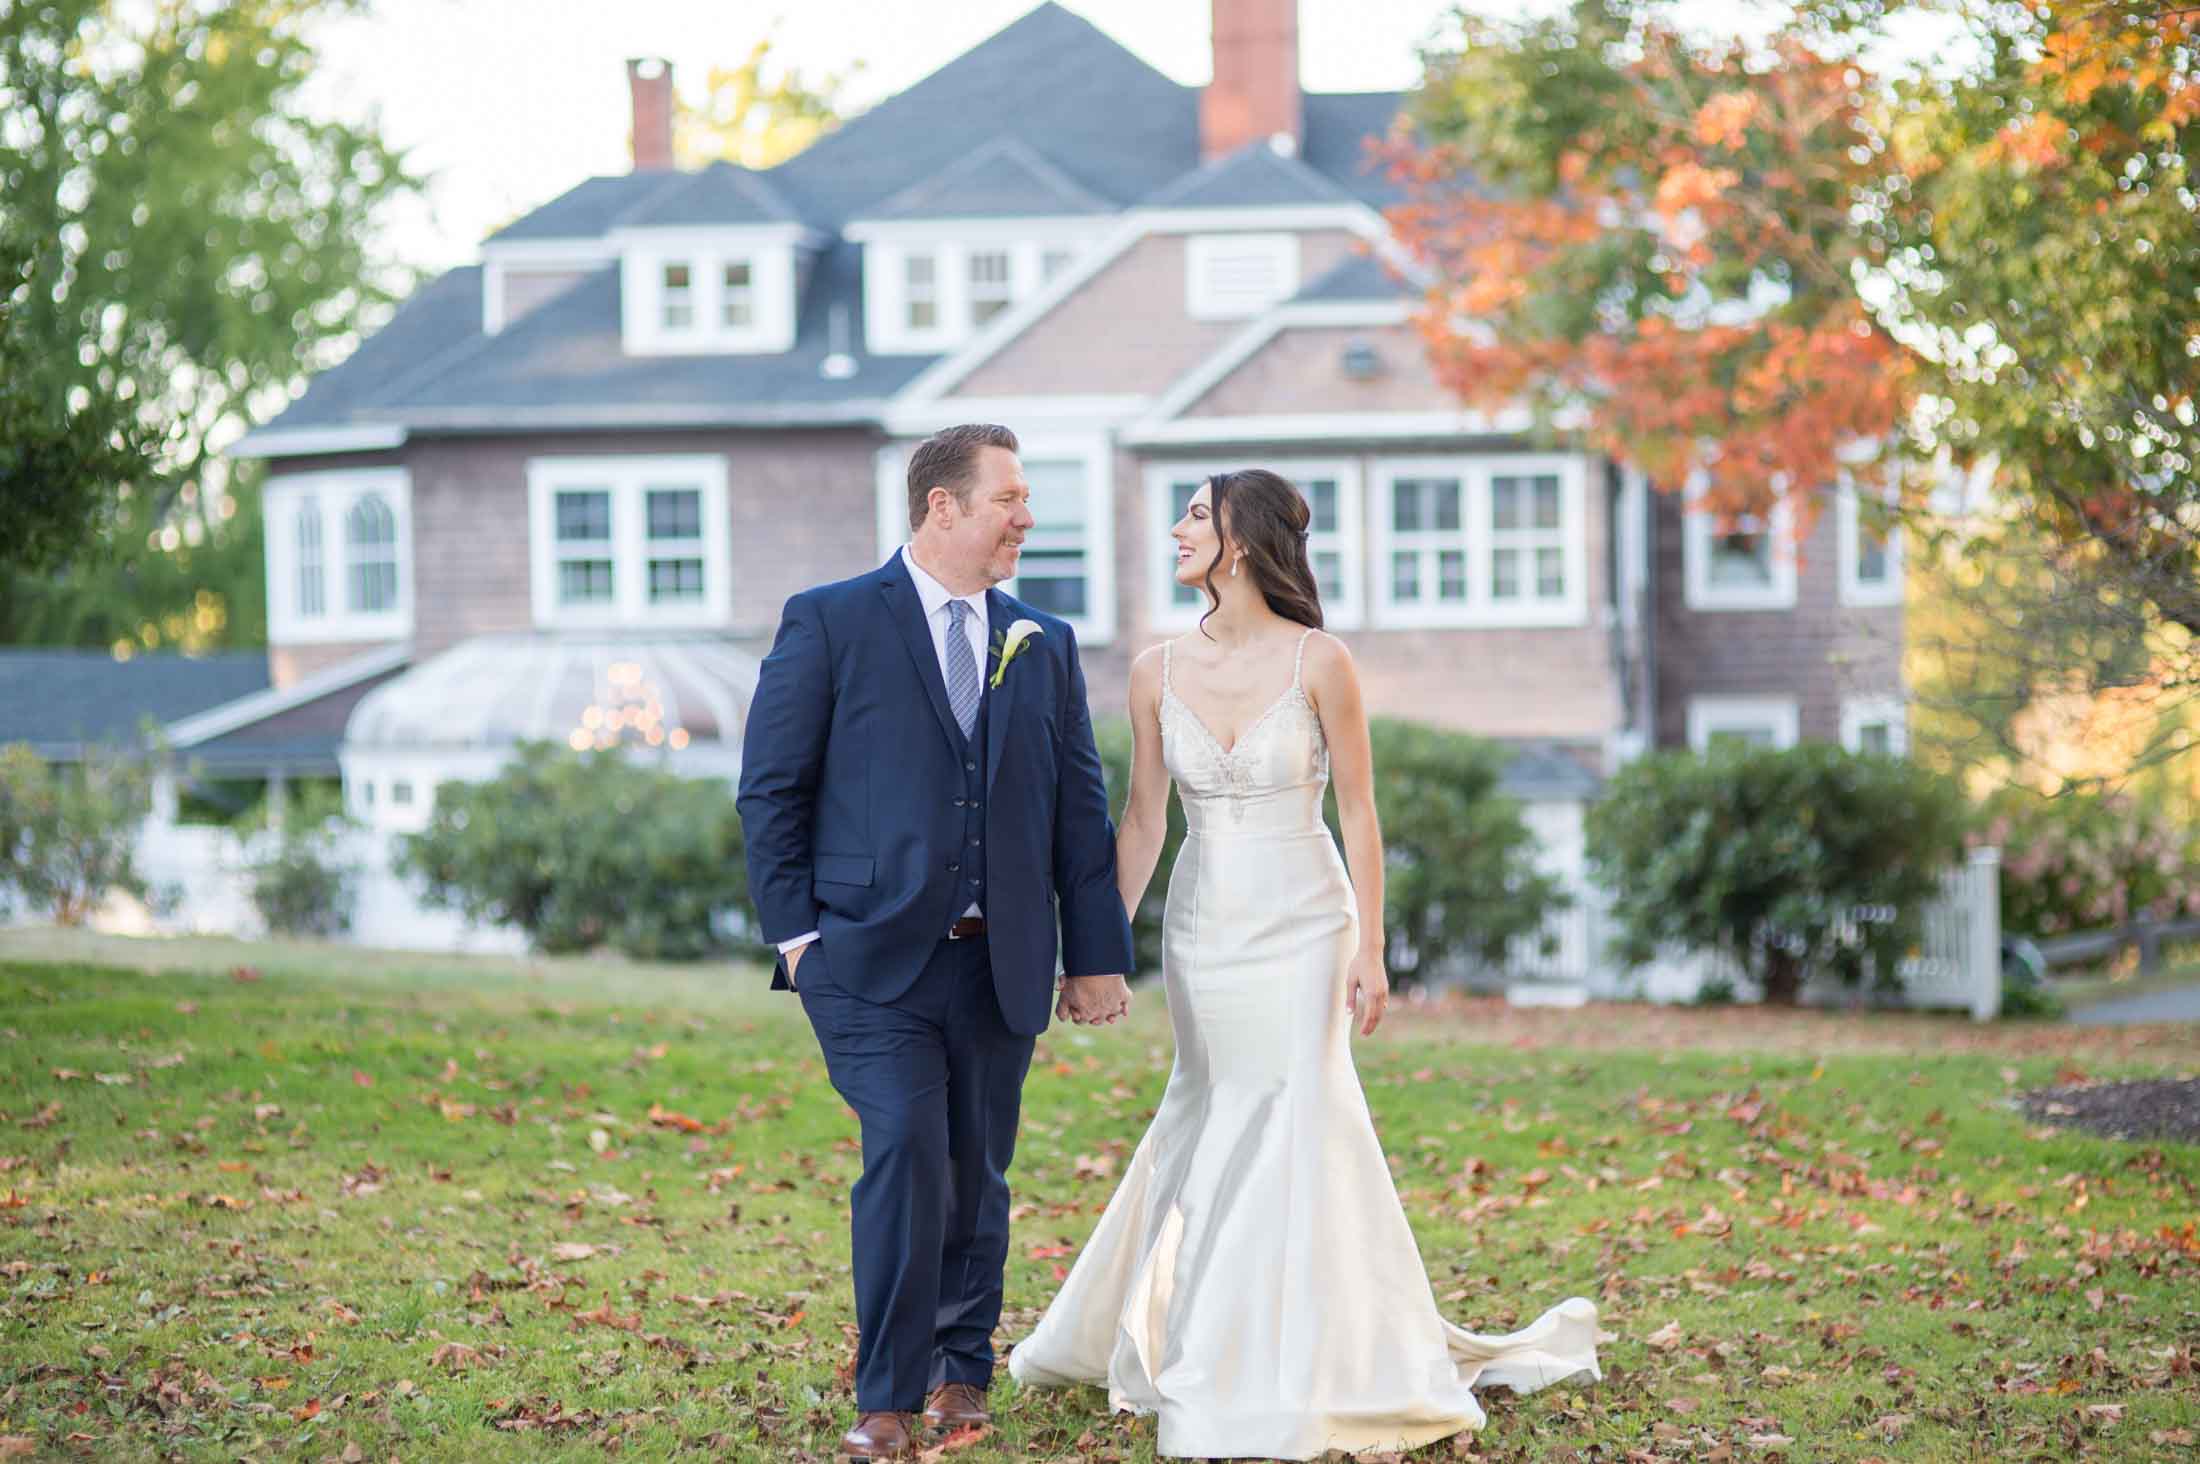 bride-groom-hand-in-hand-across-lawn-with-mansion-in-background